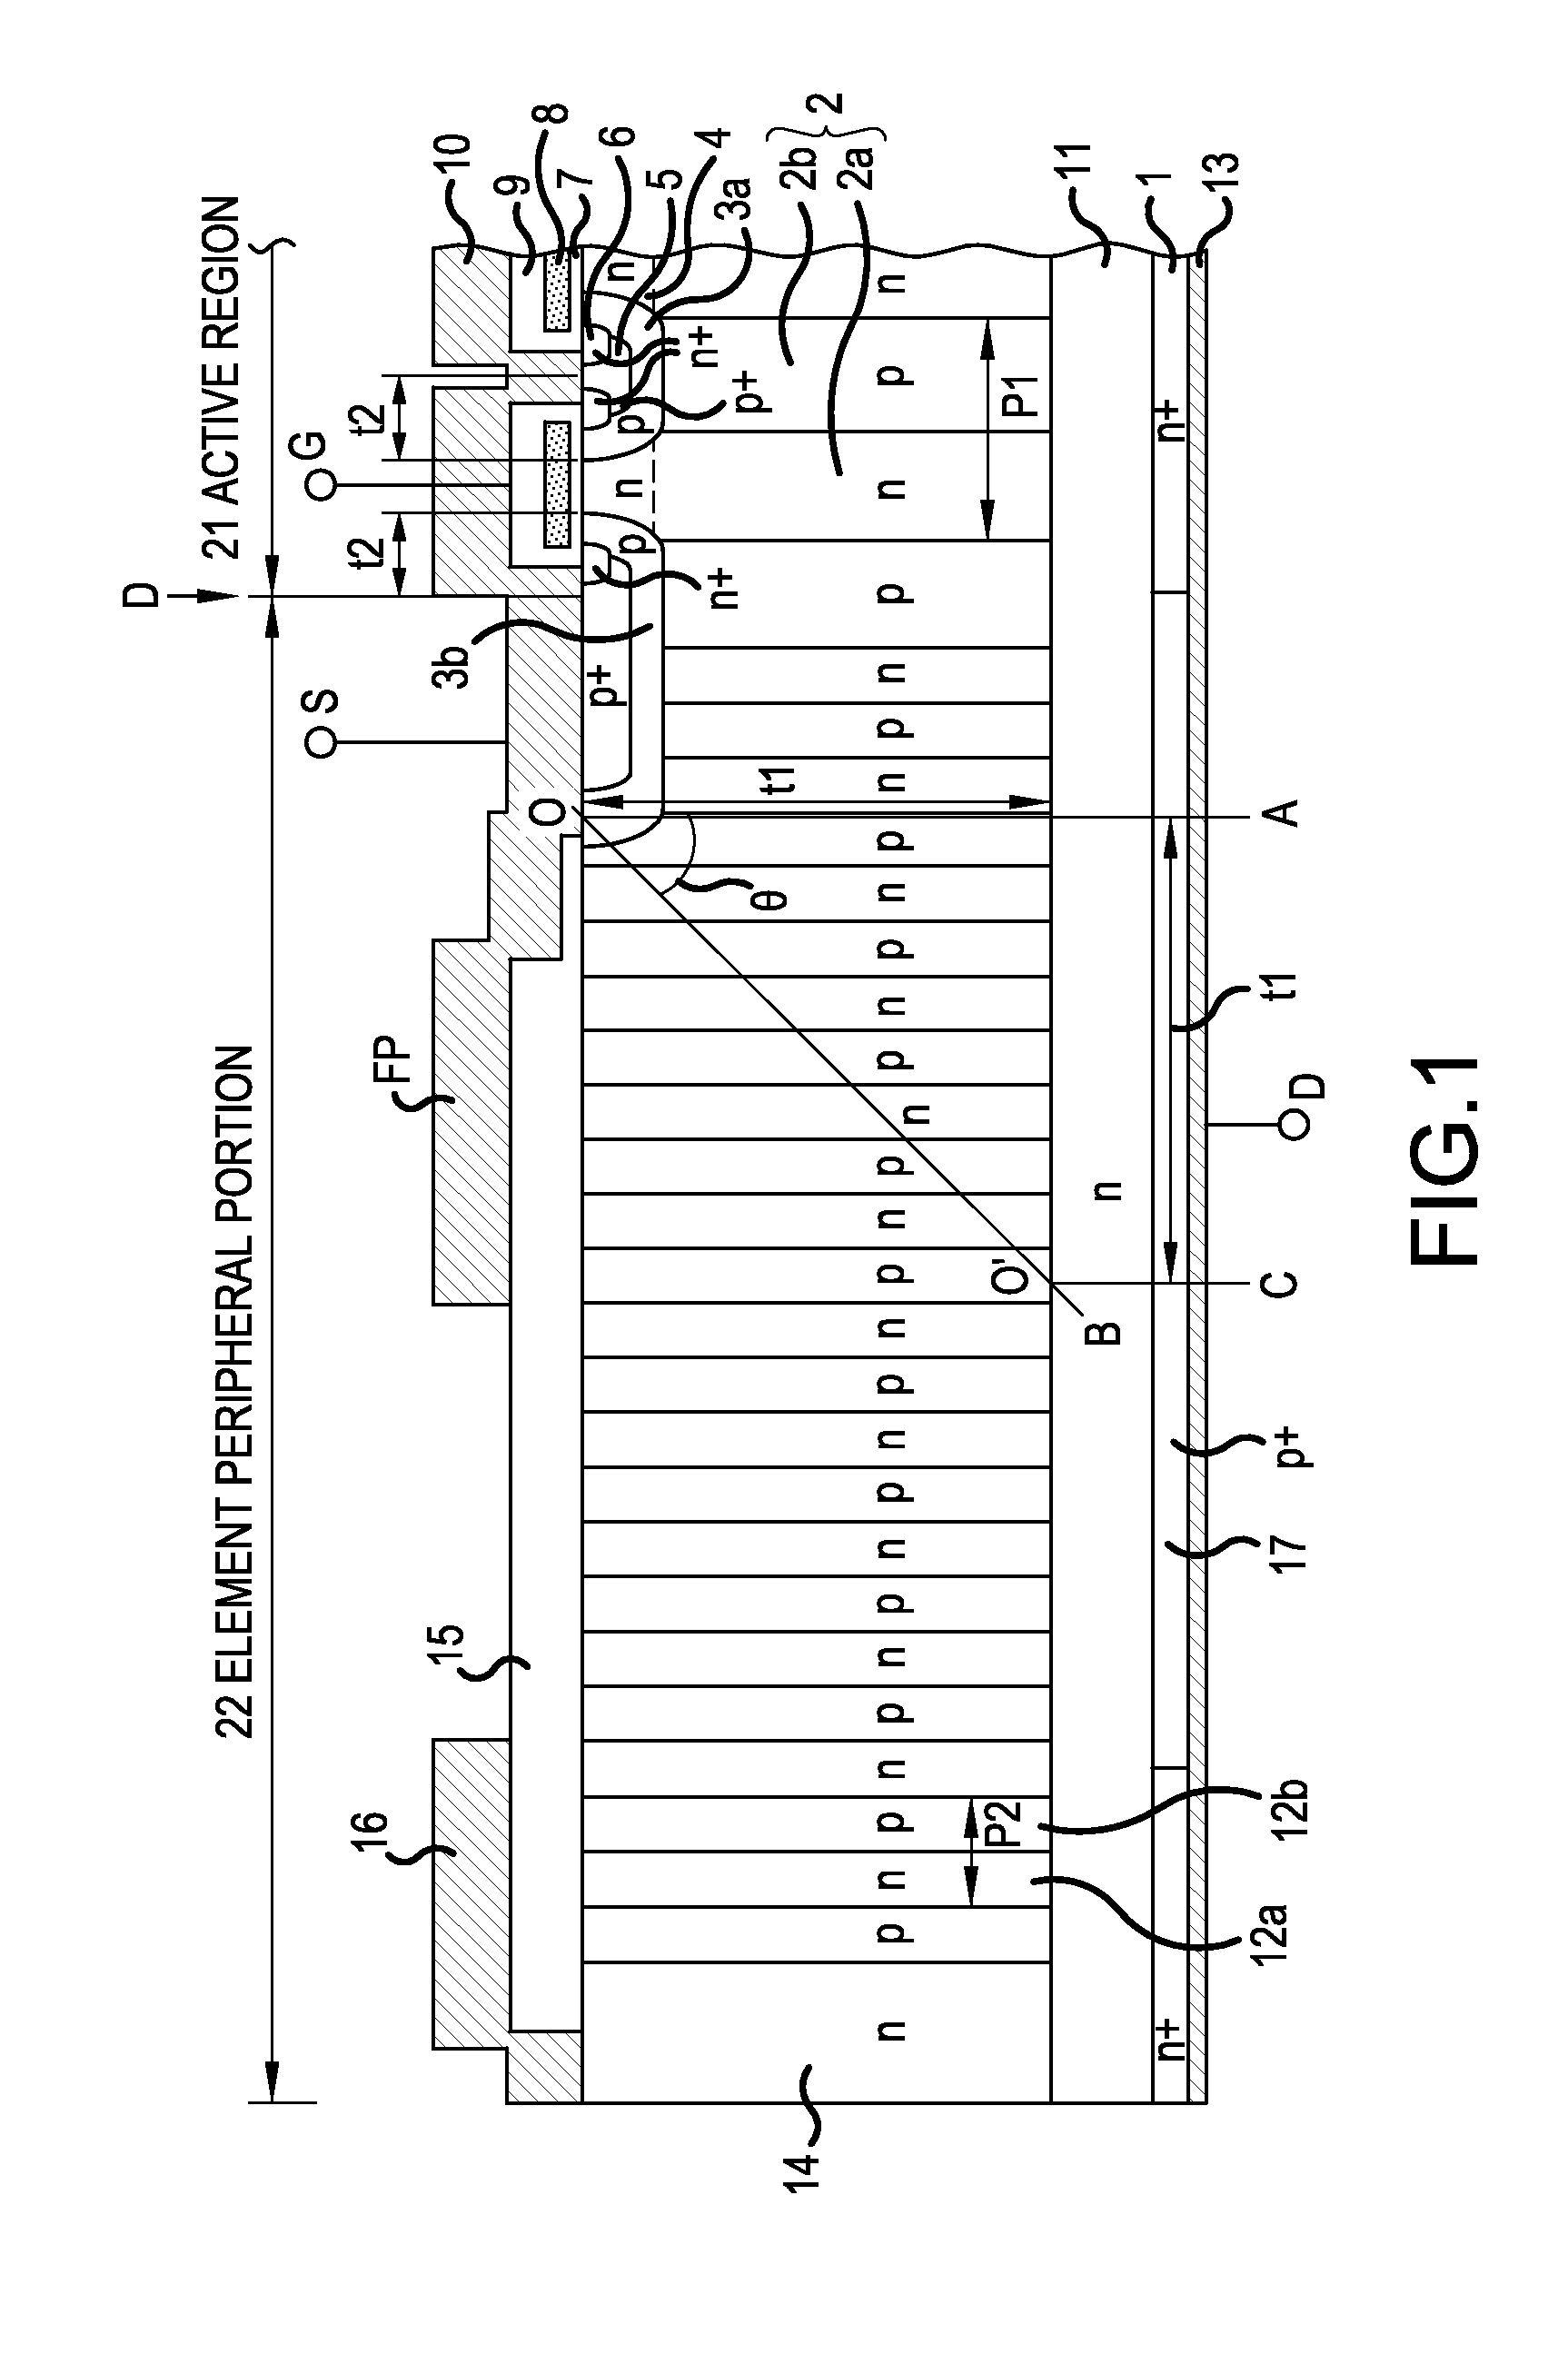 Semiconductor element including active region, low resistance layer and vertical drift portion